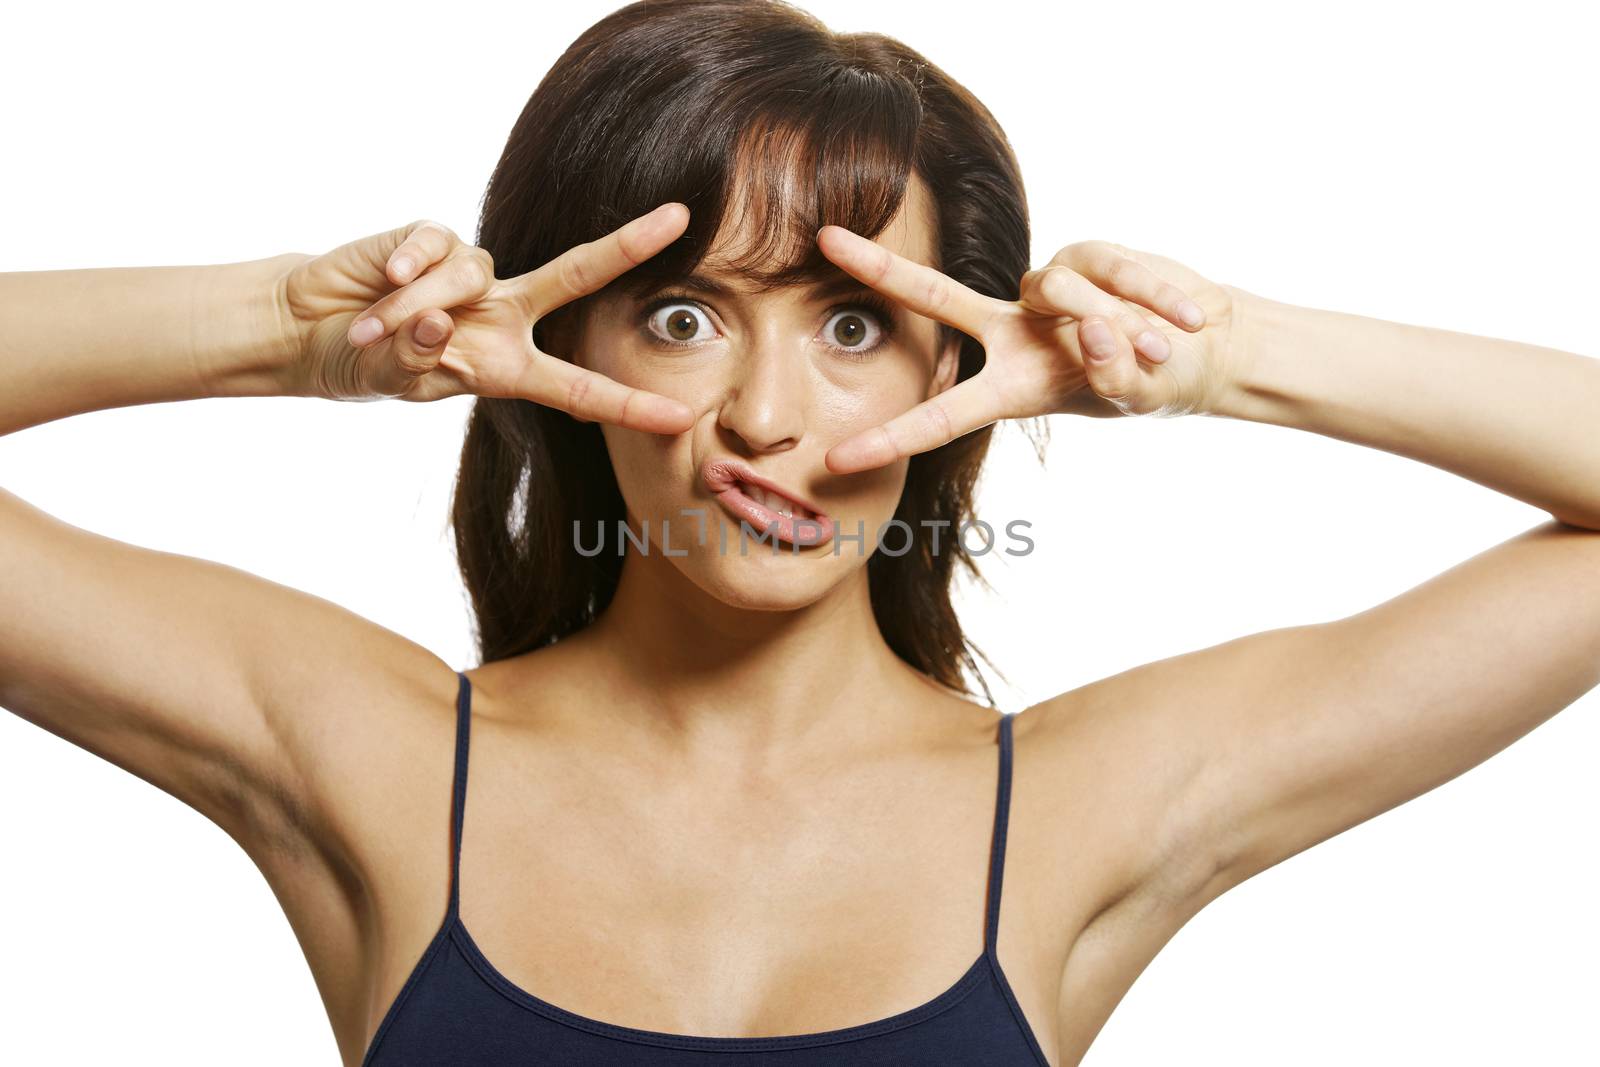 Woman covering her eyes with her hands in a victory expression